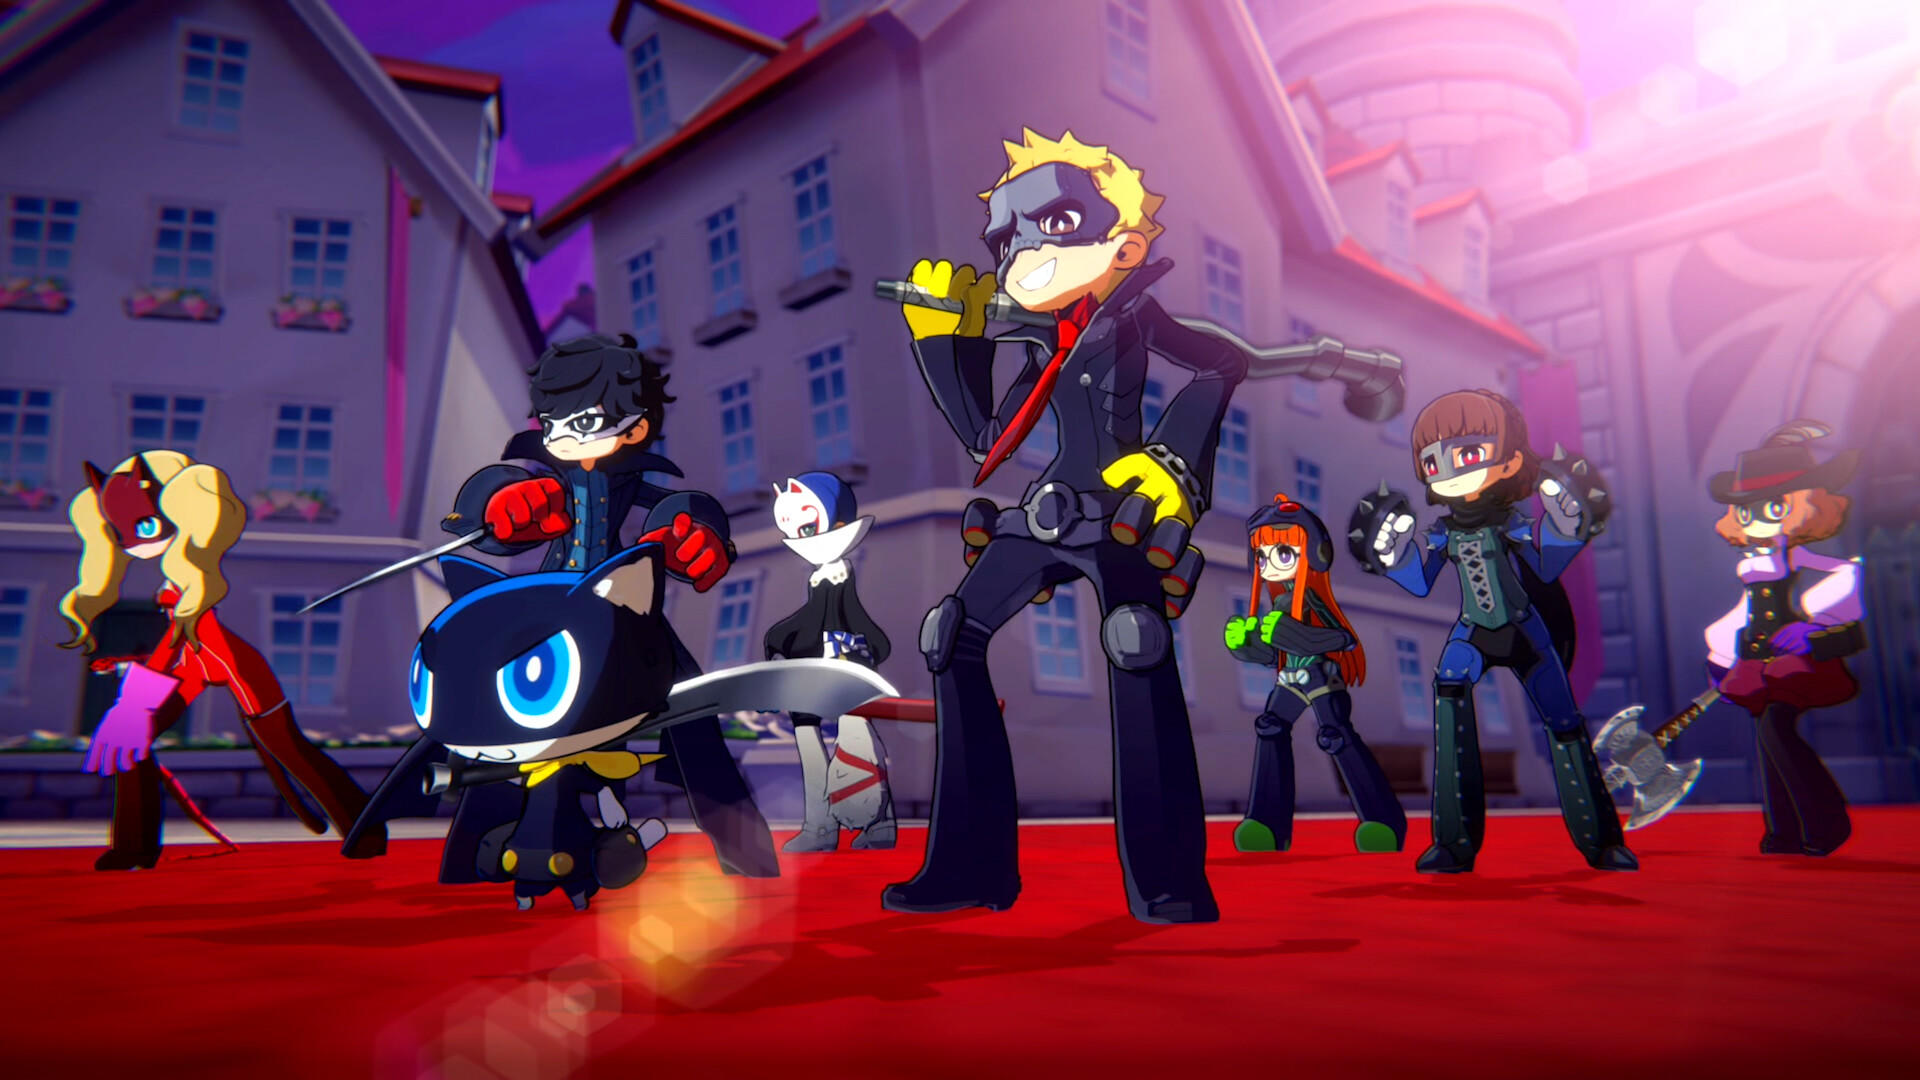 I can't wait for Persona 5 Tactica even with the goofy chibi character models